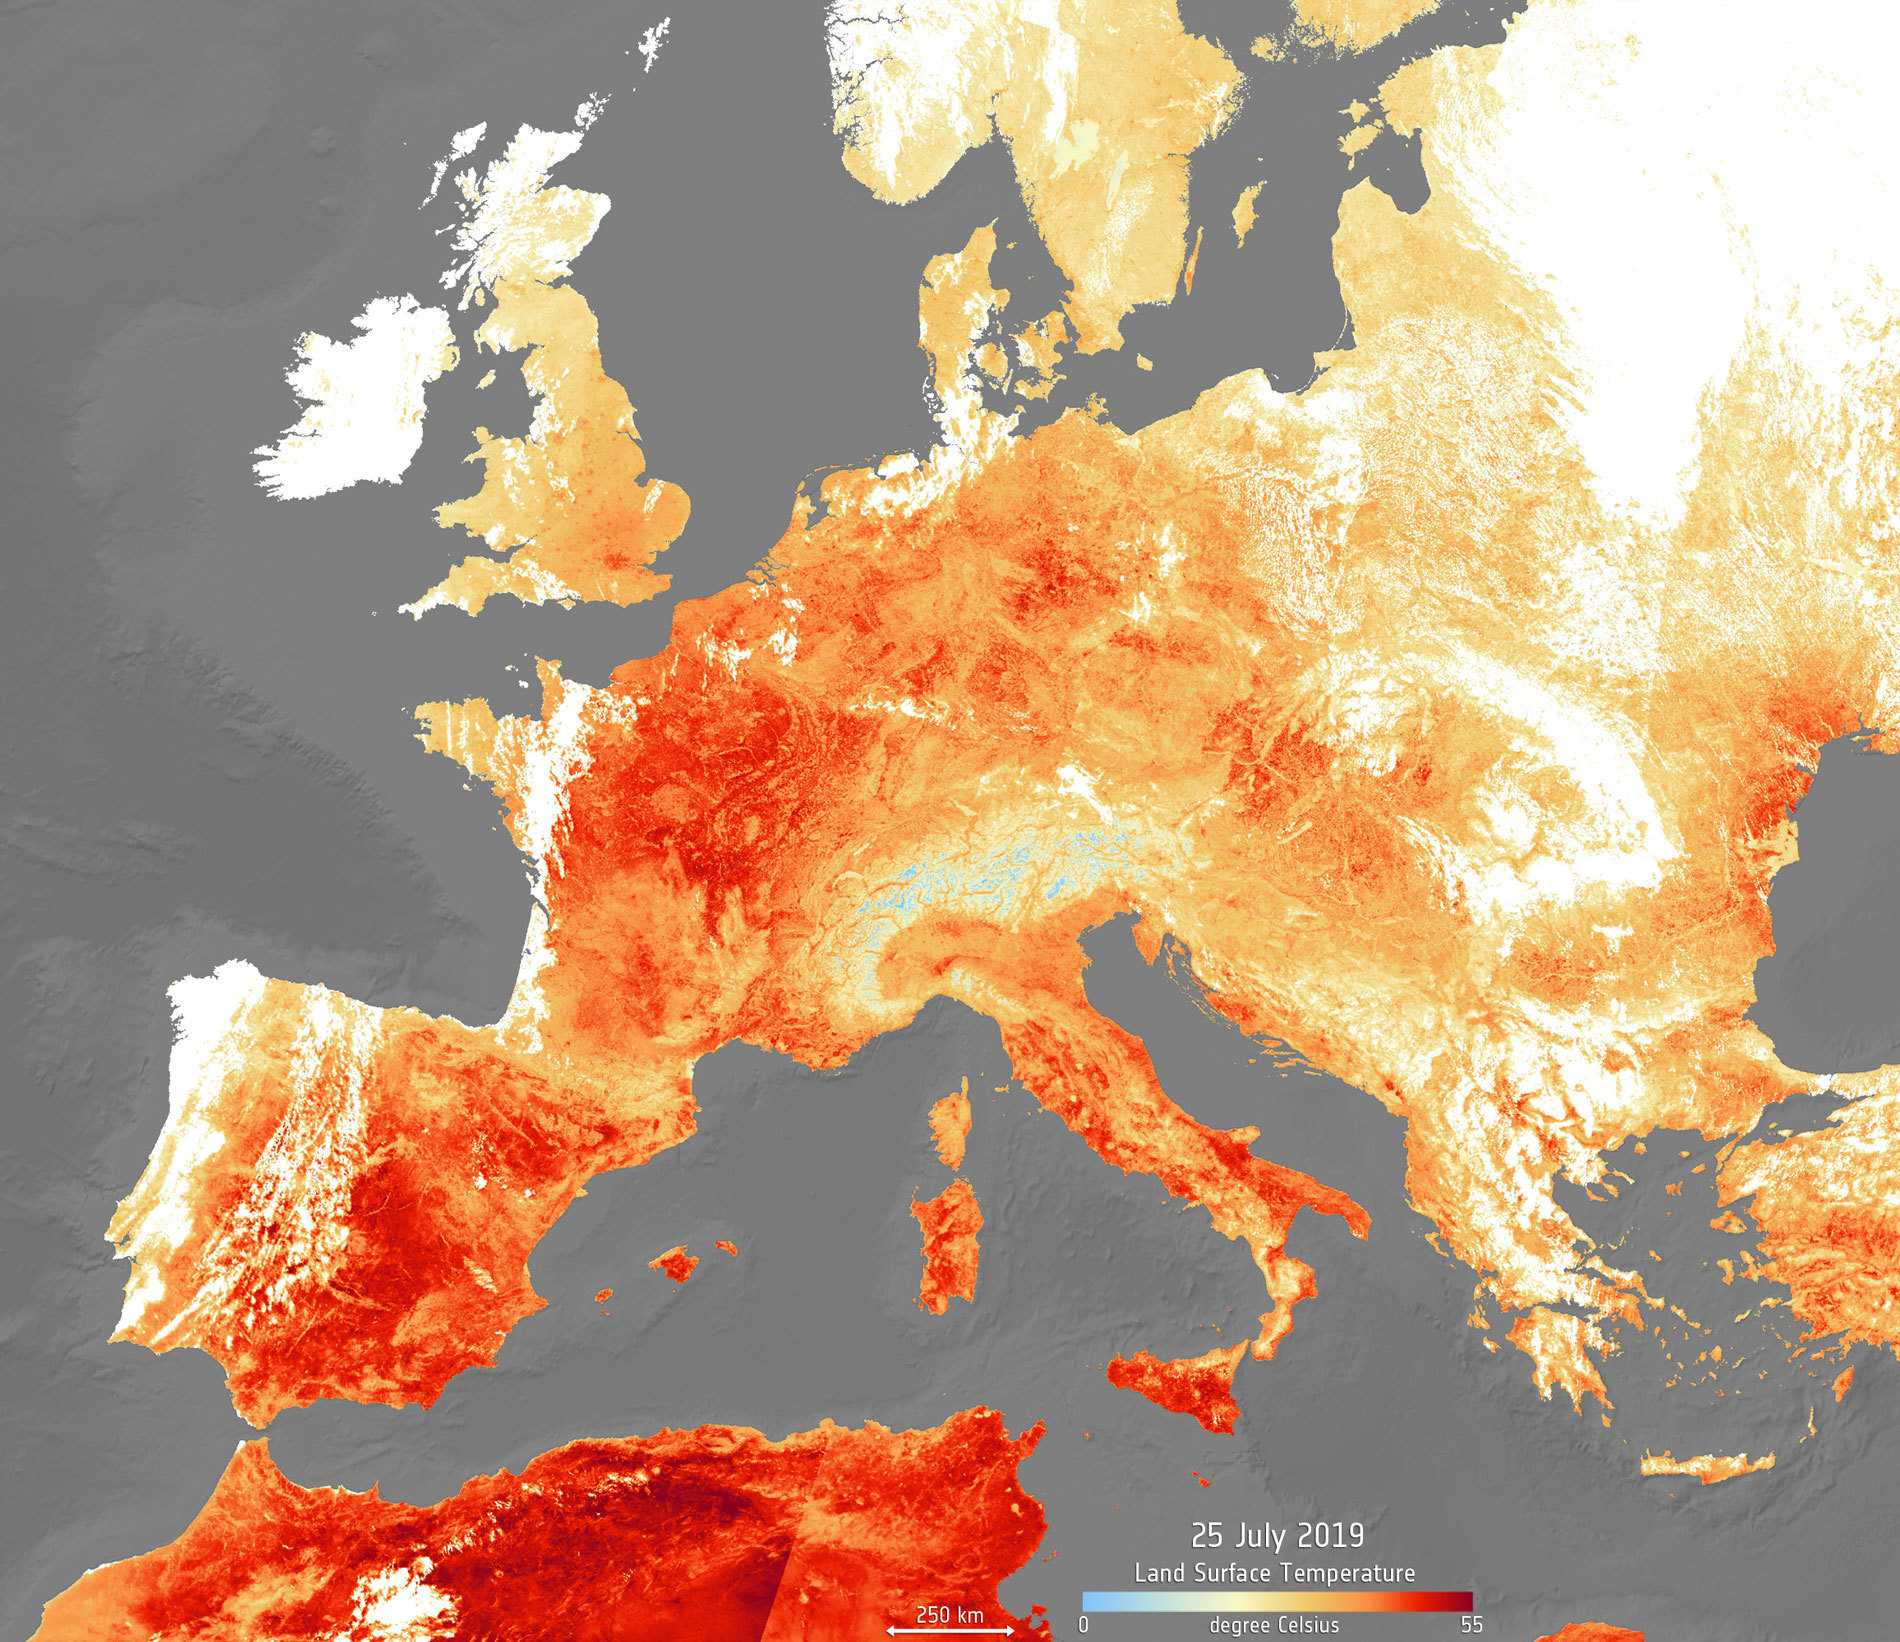 Europe Is Warming Faster Than Even Climate Models Projected - Yale E360